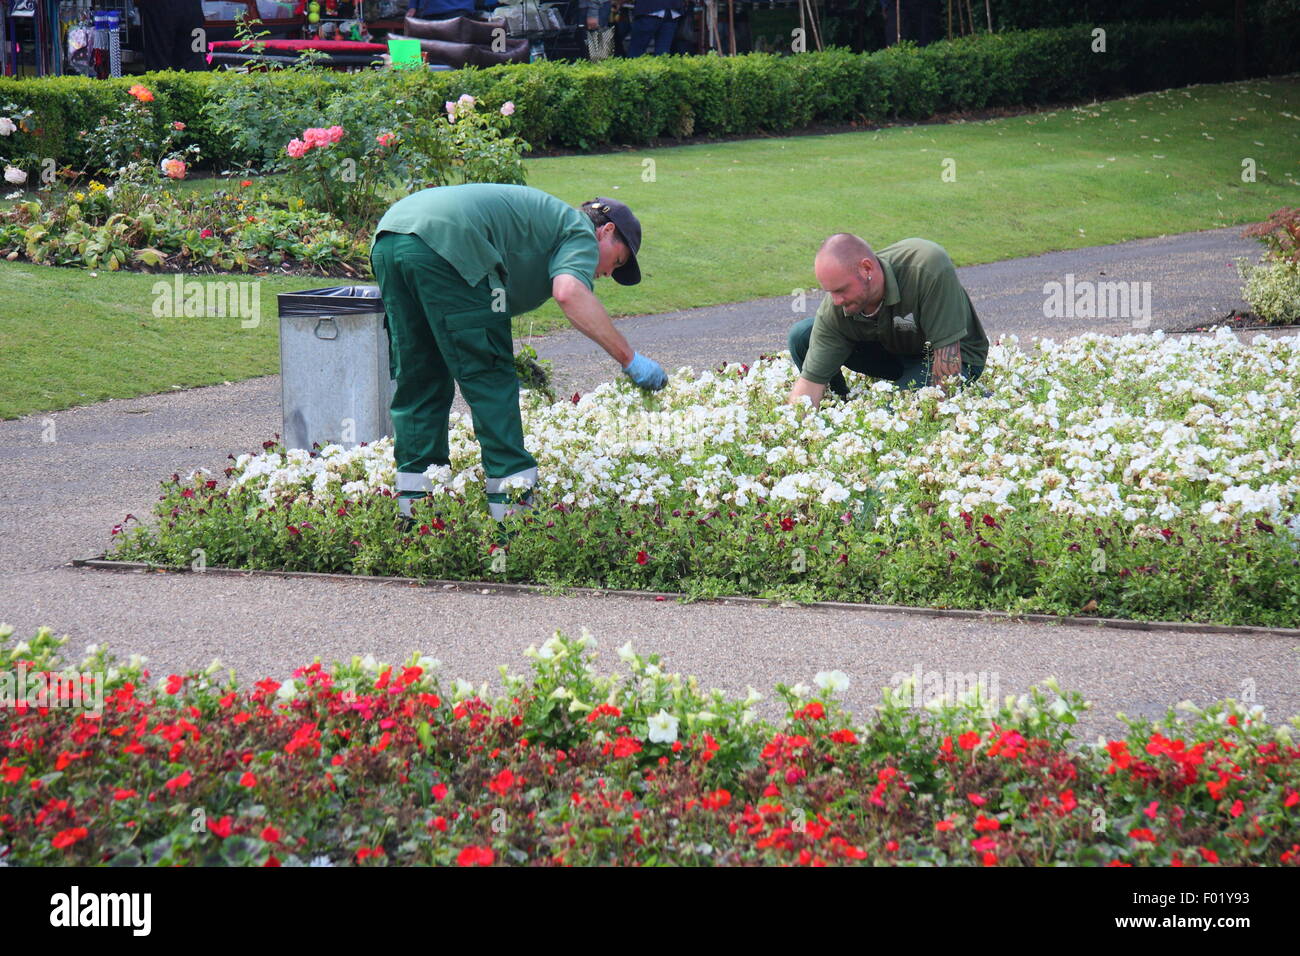 Council workers tend to flower beds in public formal gardens in Hall Leys Park, Matlock, Derbyshire England UK Stock Photo